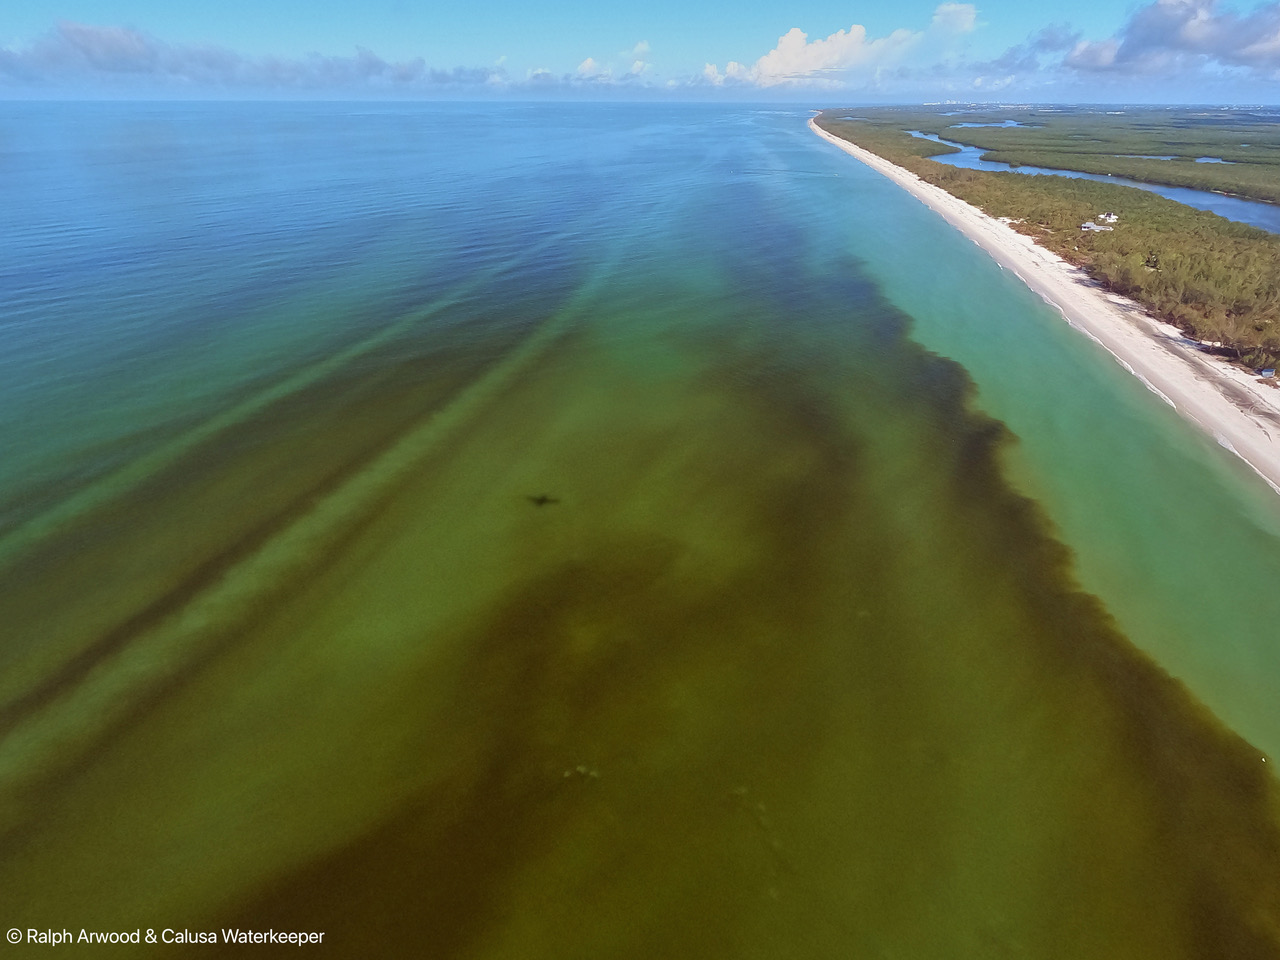 Aerial view of apparent red tide and other phytoplankton species in the water near Naples and Sanibel, Florida on 13 November 2022. According to the Florida Fish and Wildlife Conservation Commission, beaches from Sarasota to Port Charlotte varied between low, medium, and high levels of red tide. Because Hurricane Ian brought so much rain to Florida in September, scientists on the coast closely monitored water quality to see if the storm had any impacts. Photo: Ralph Arwood / Calusa Waterkeeper